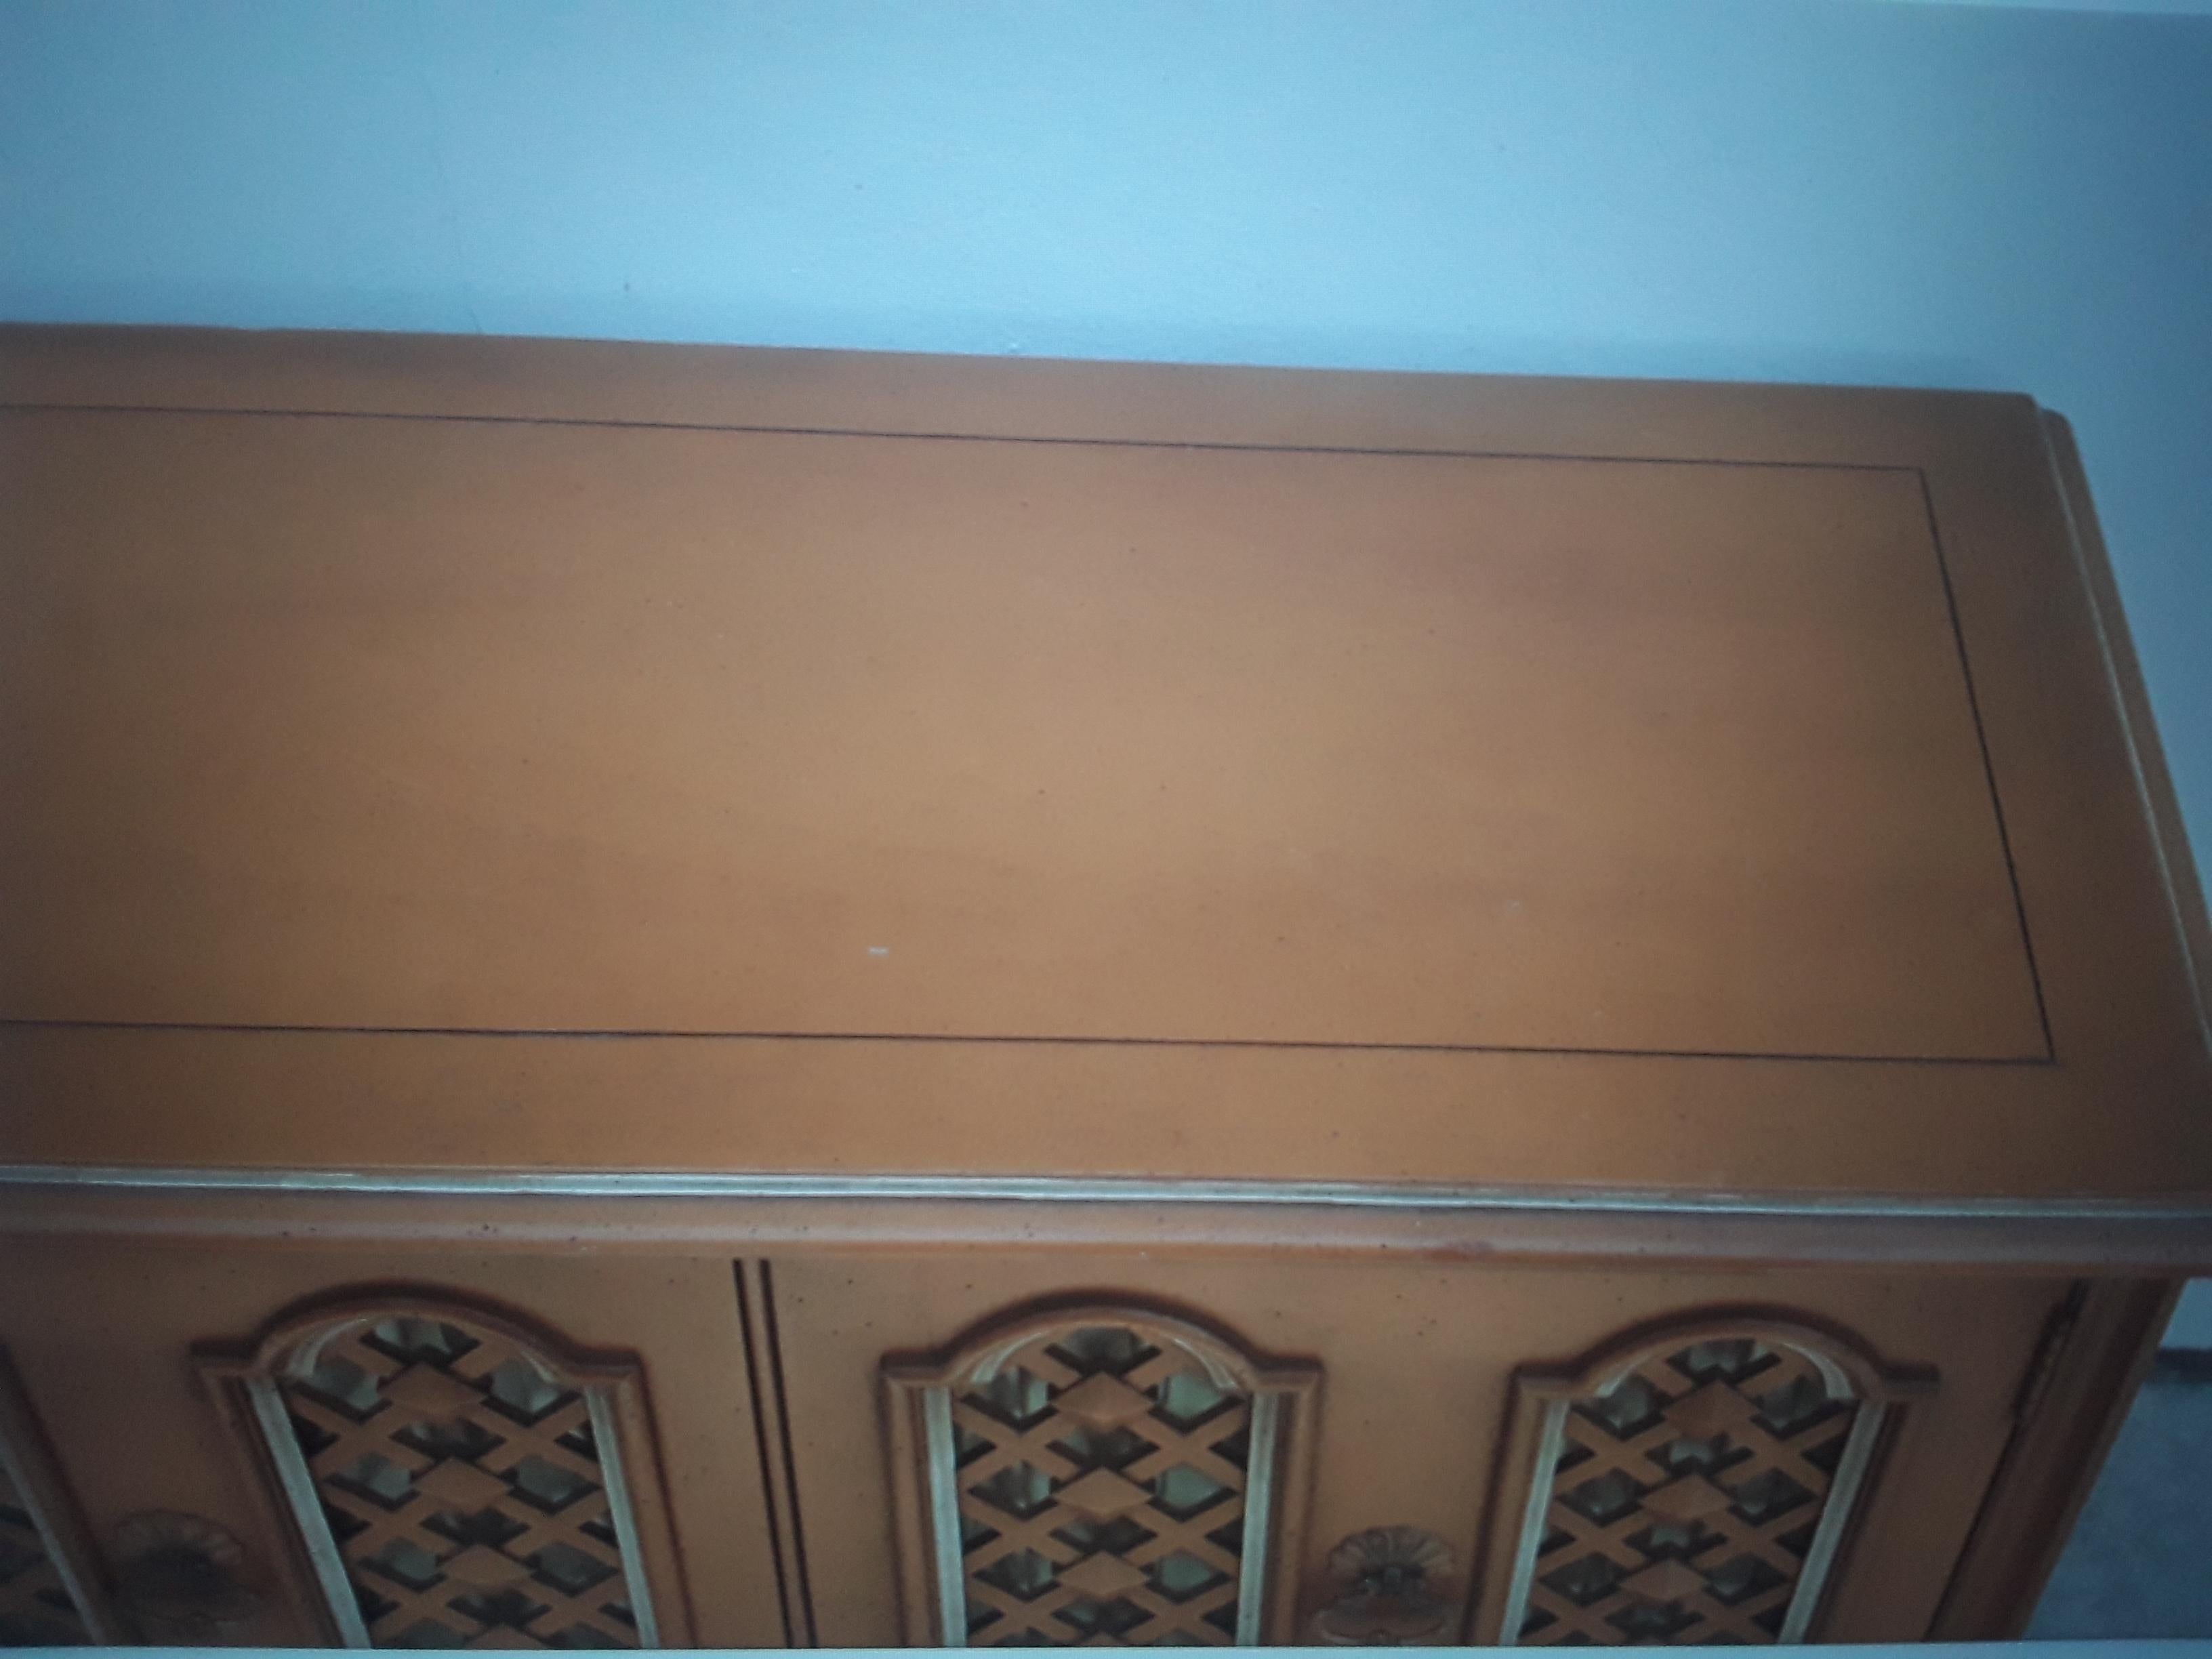 1960's Mid Century Modern Low Sideboard/ Buffet/ Credenza in Orange Brown Tone In Good Condition For Sale In Opa Locka, FL